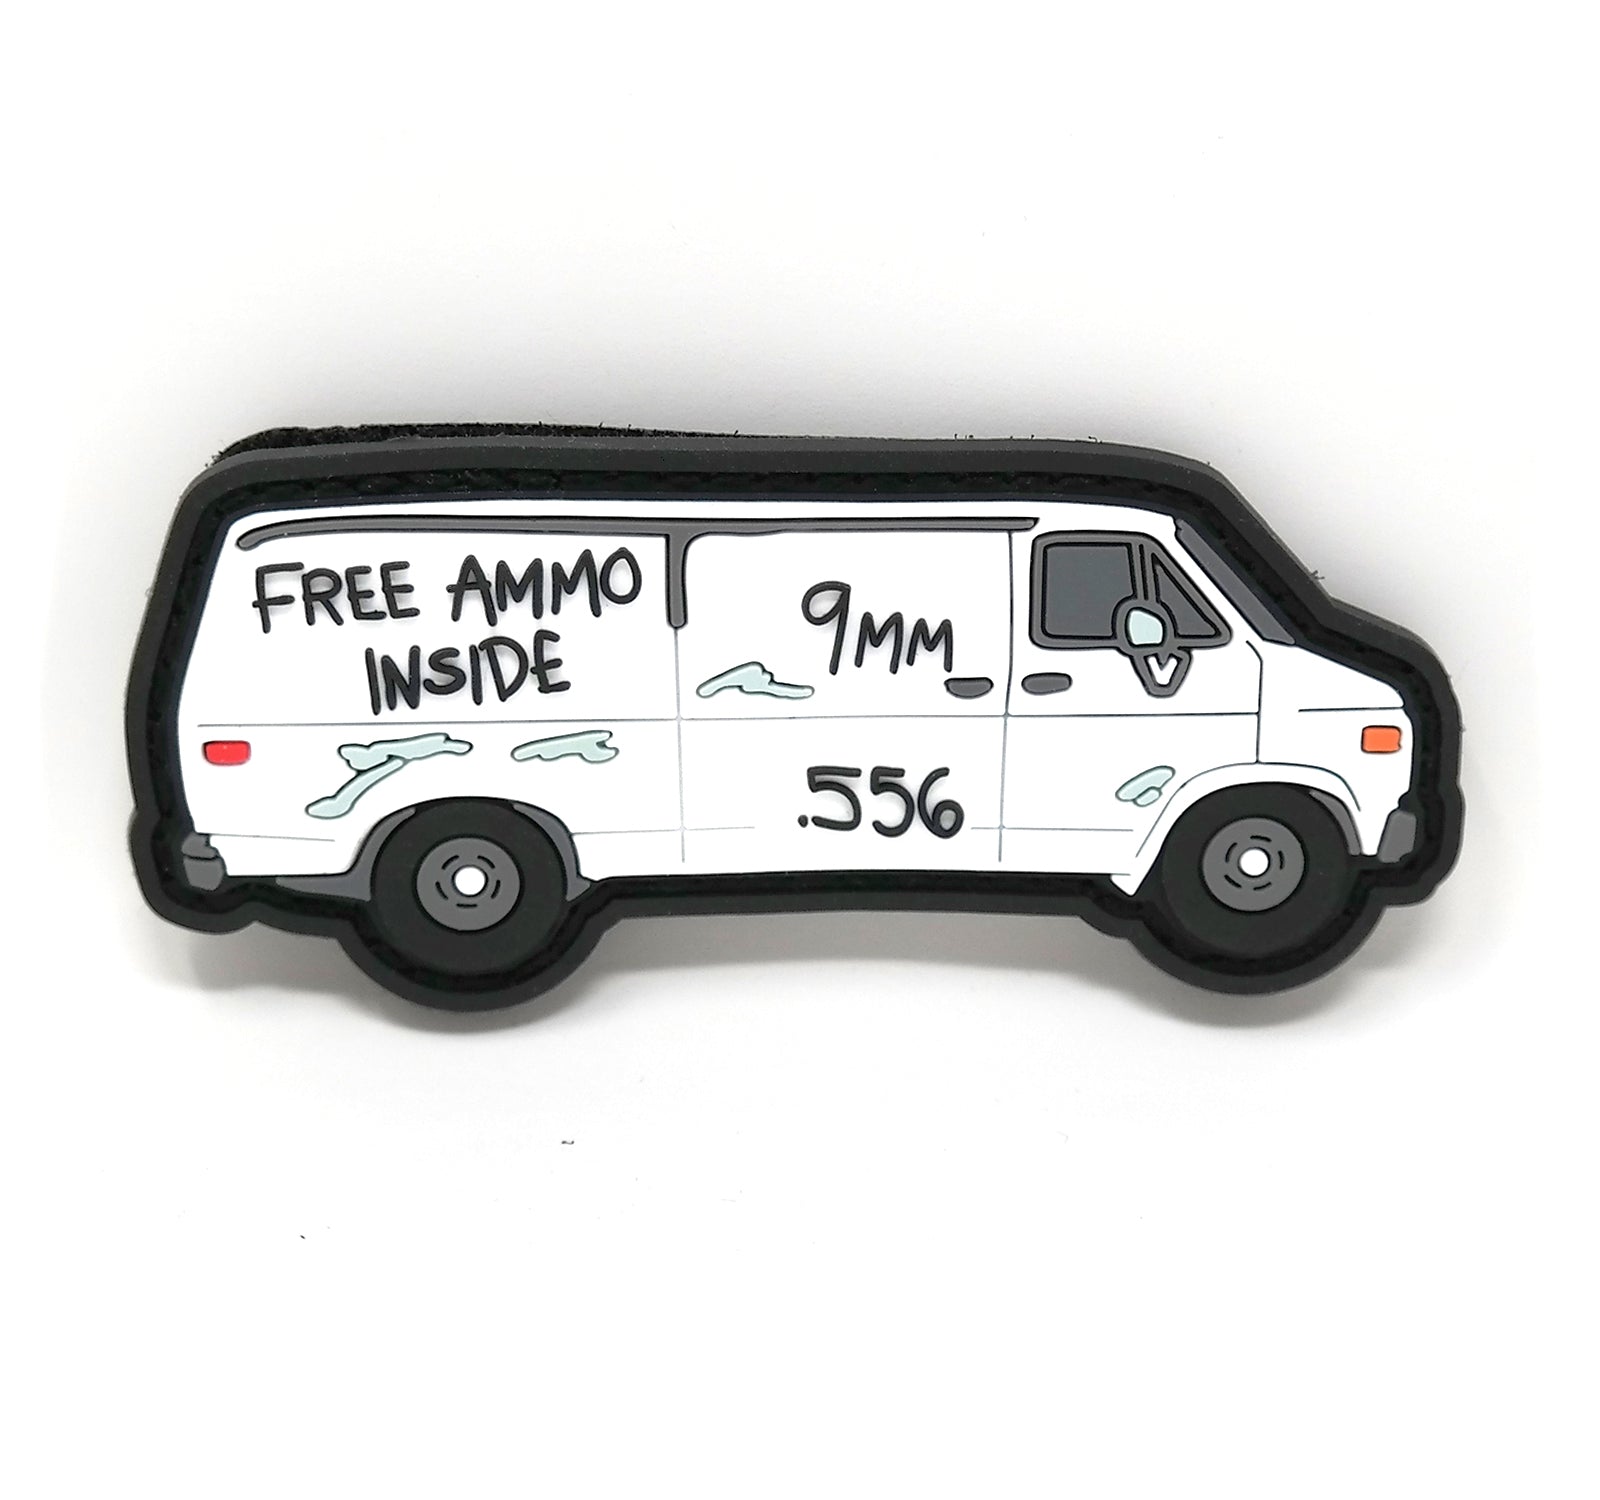 Tactical Van Stinking Ammo Patch Loop Free PVC Funny – Hook Patch Rubber and